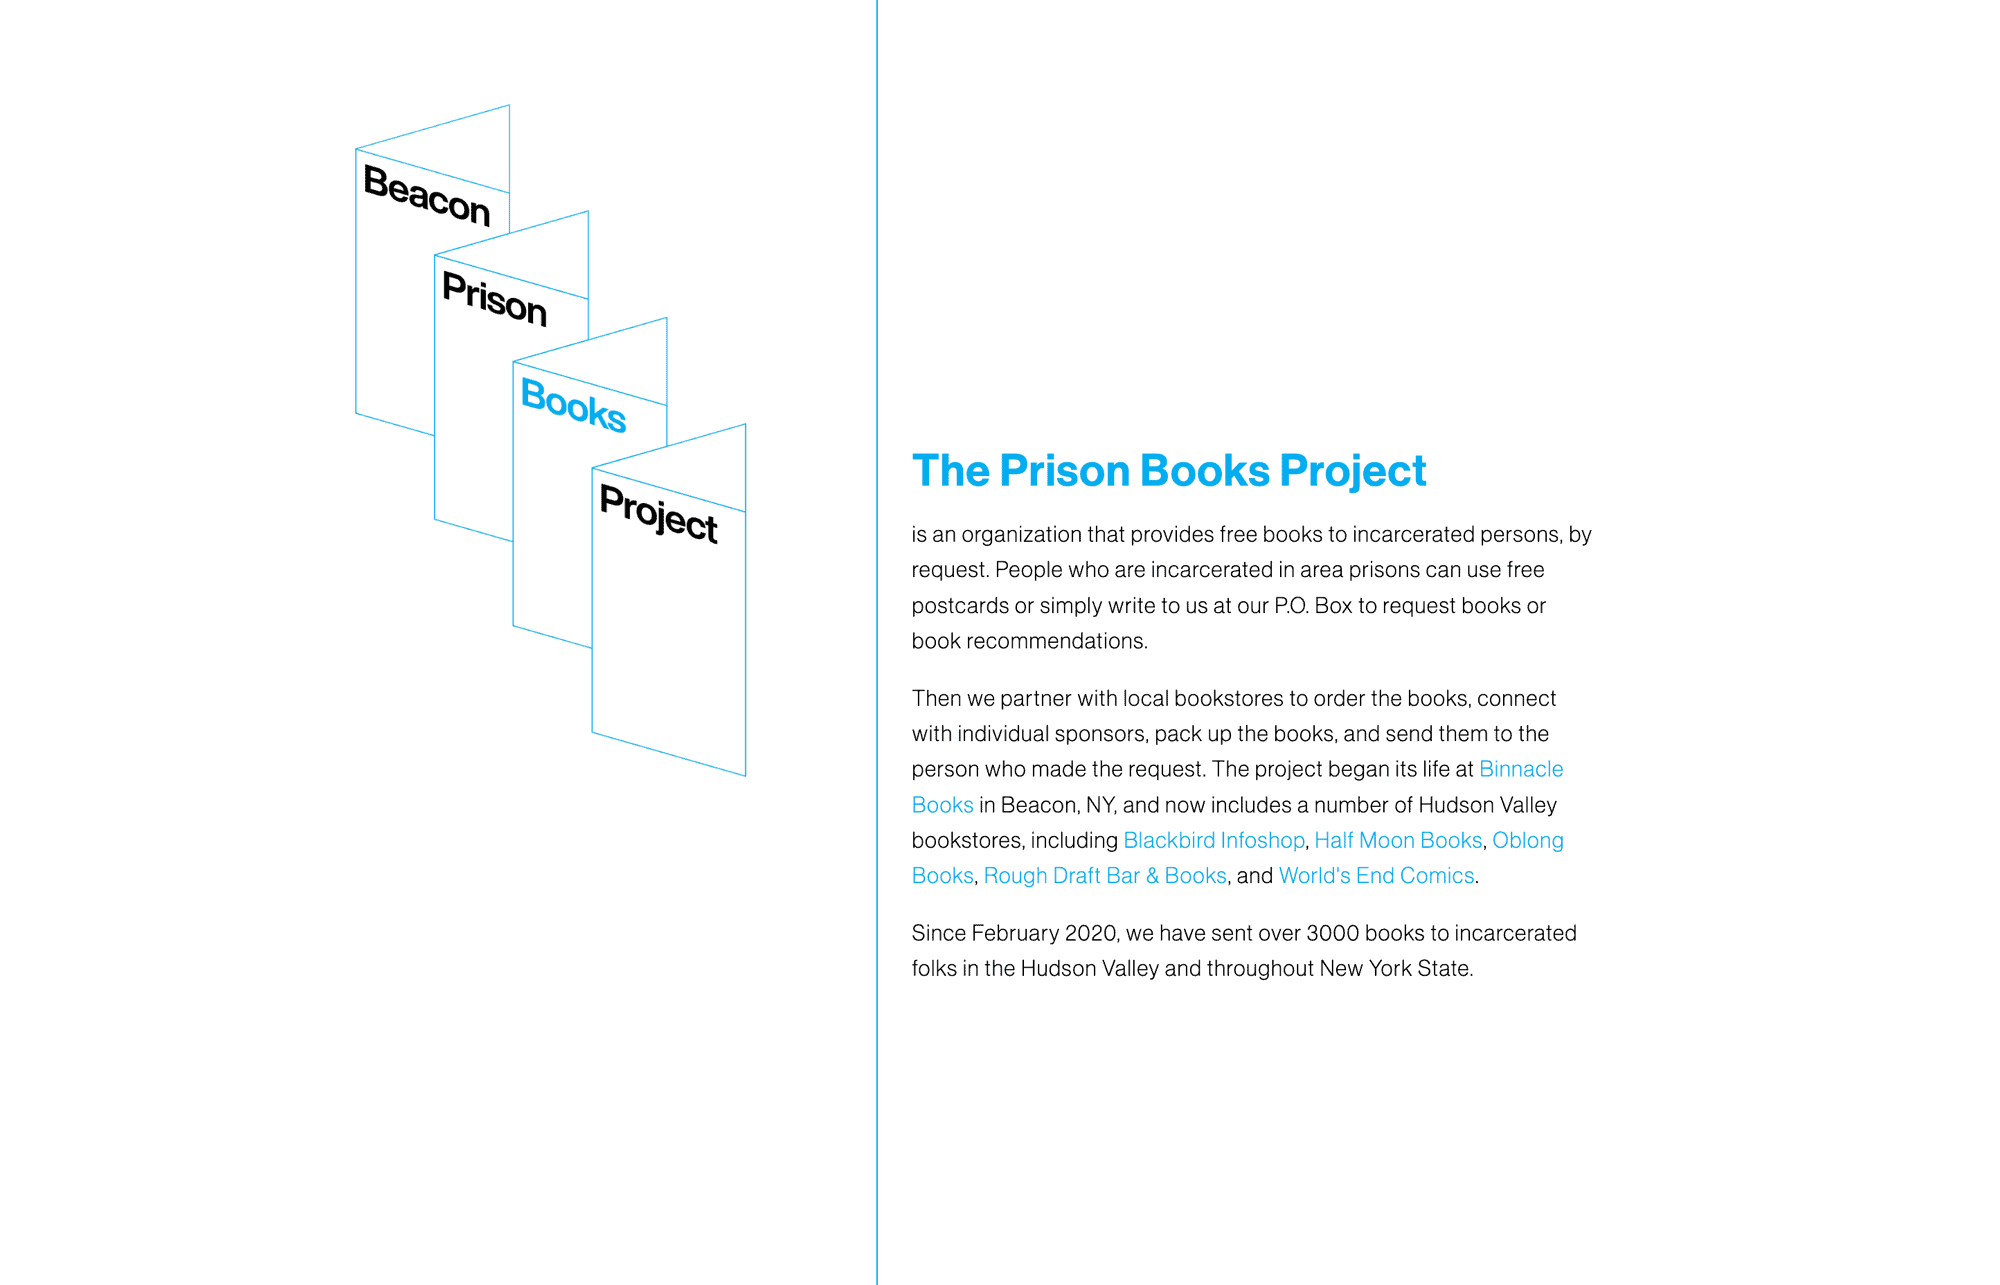 The landing page for the Beacon Prison Books Project, which includes the logo and a simple mission statement: 